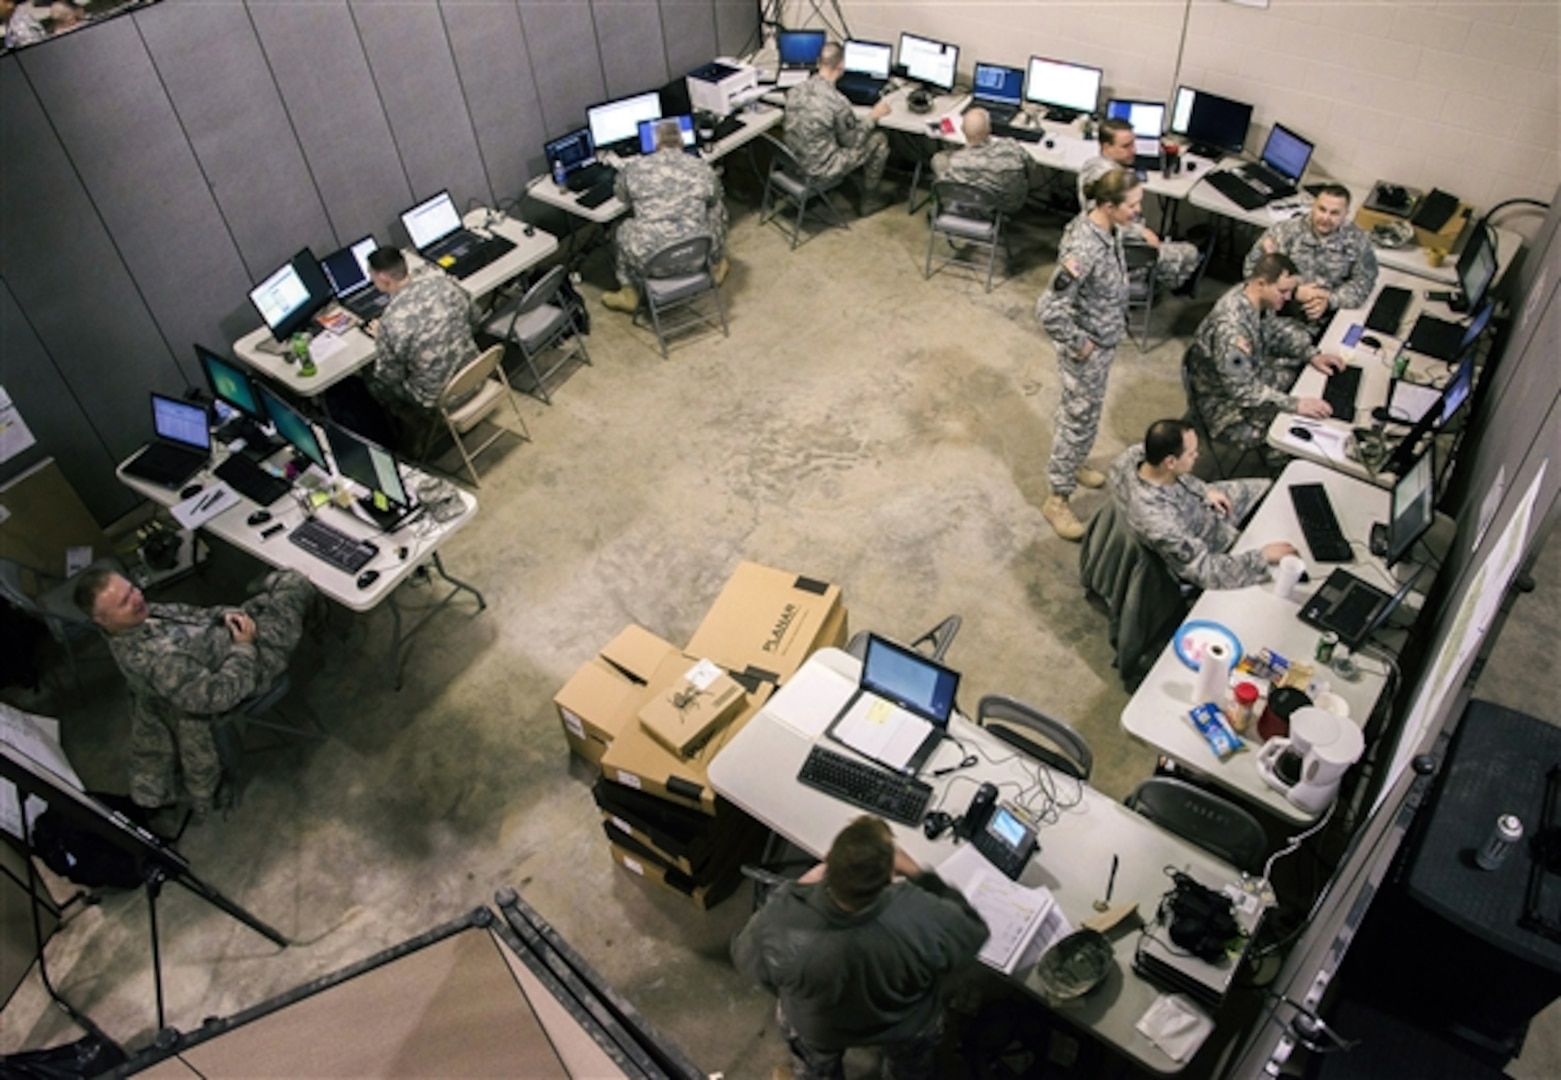 Members of the Ohio National Guard Computer Network Defense Team conduct cyber defense operations during exercise Cyber Shield 2015 at Camp Atterbury, Indiana, March 20, 2015. The exercise was designed to develop the defensive skills of soldiers and airmen tasked with securing their organizations’ computer networks. 